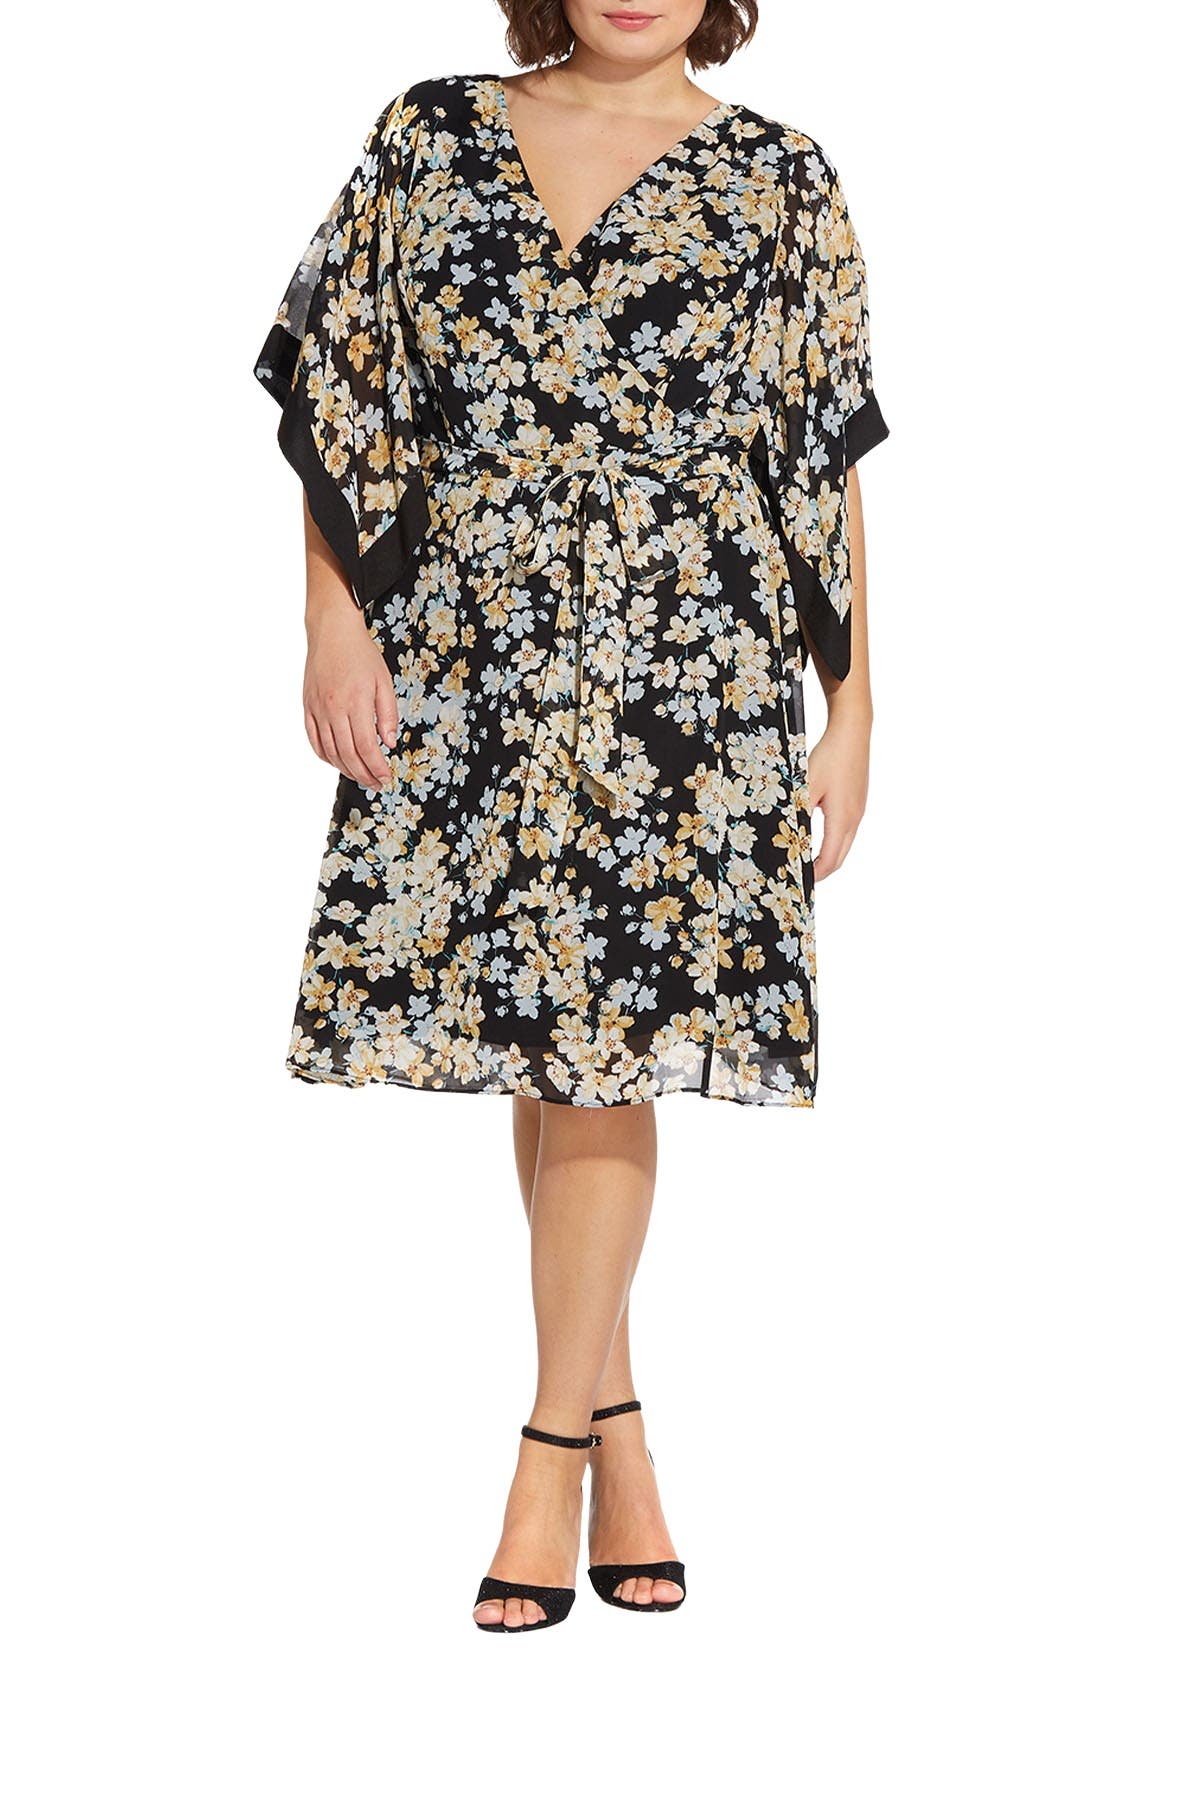 Adrianna Papell Floral Print Kimono Sleeve Dress In Blk Multi